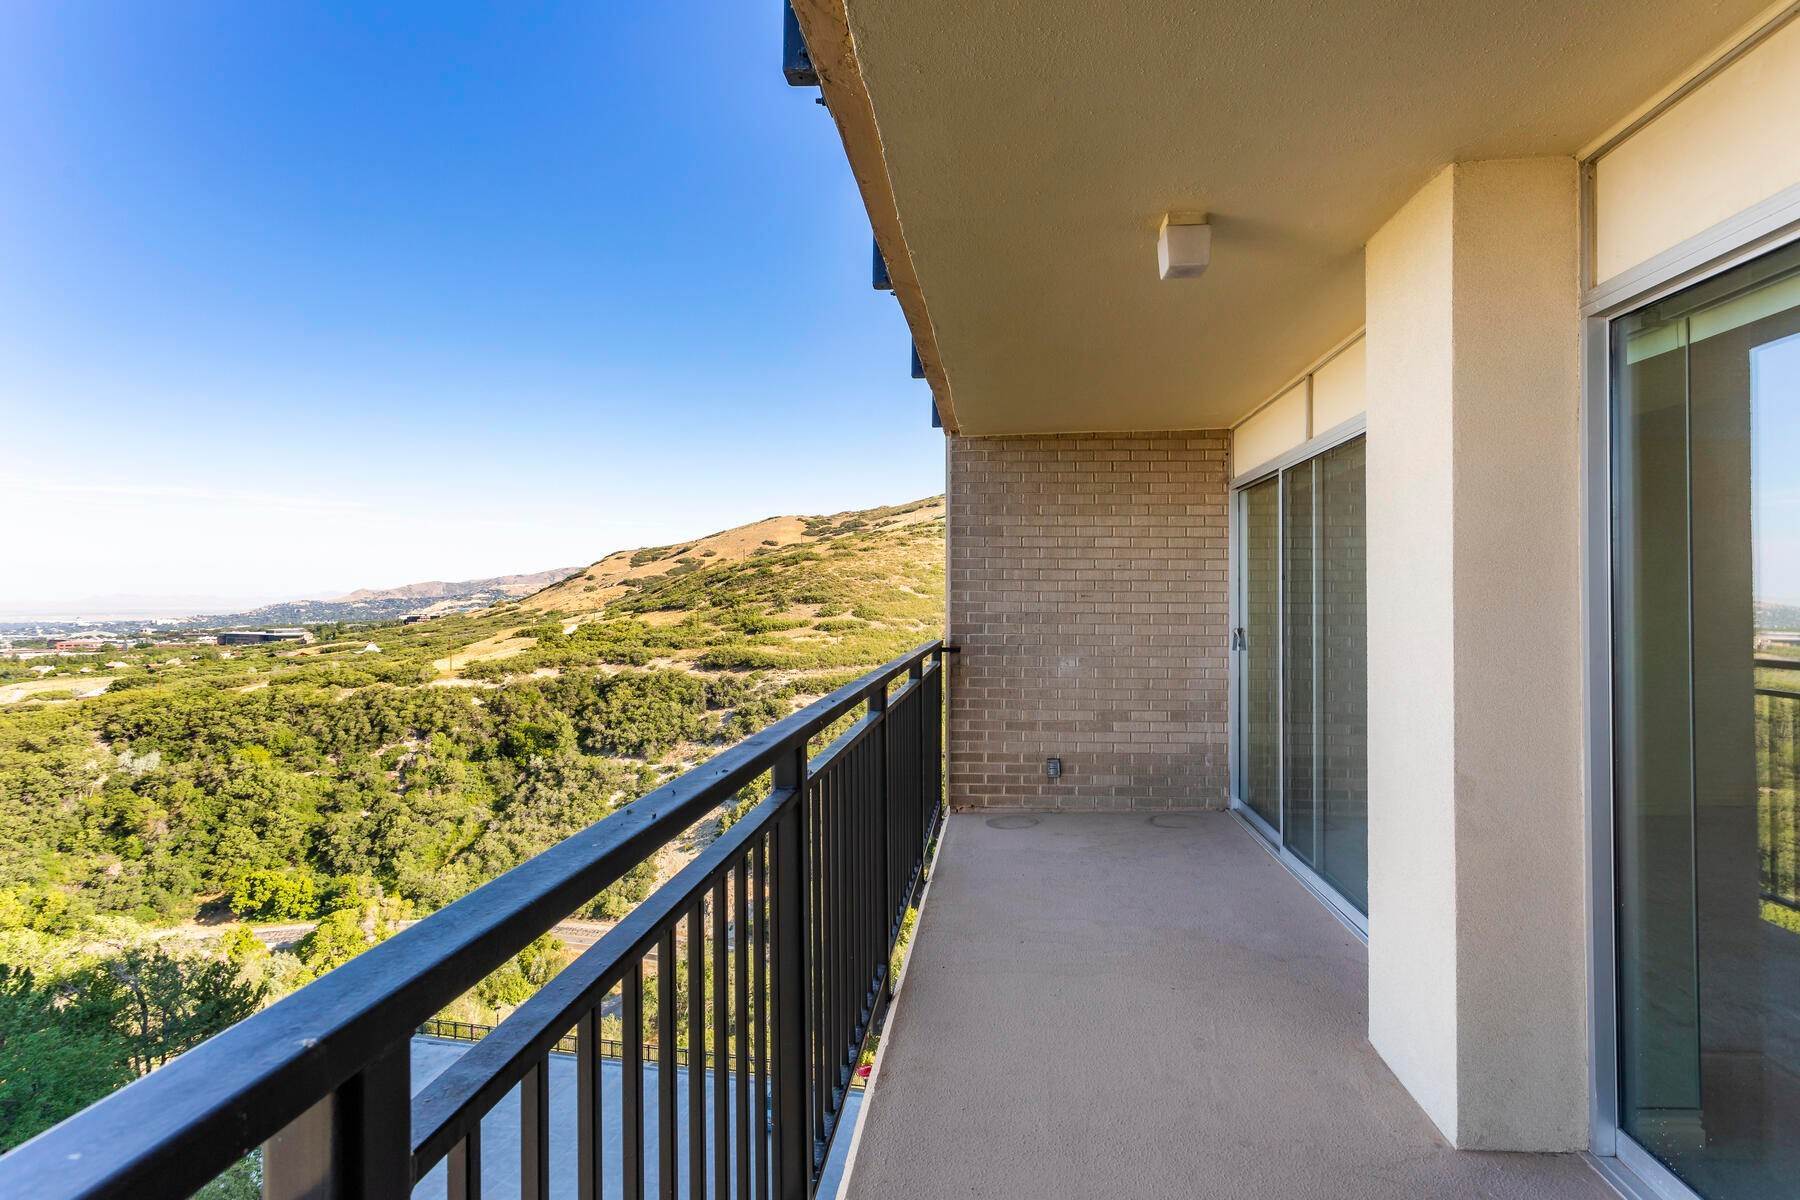 15. Condominiums for Sale at Remodeled Highrise Condo With Incredible Panoramic Views of the Entire Salt Lake 875 S Donner Way, Unit 1103 Salt Lake City, Utah 84108 United States